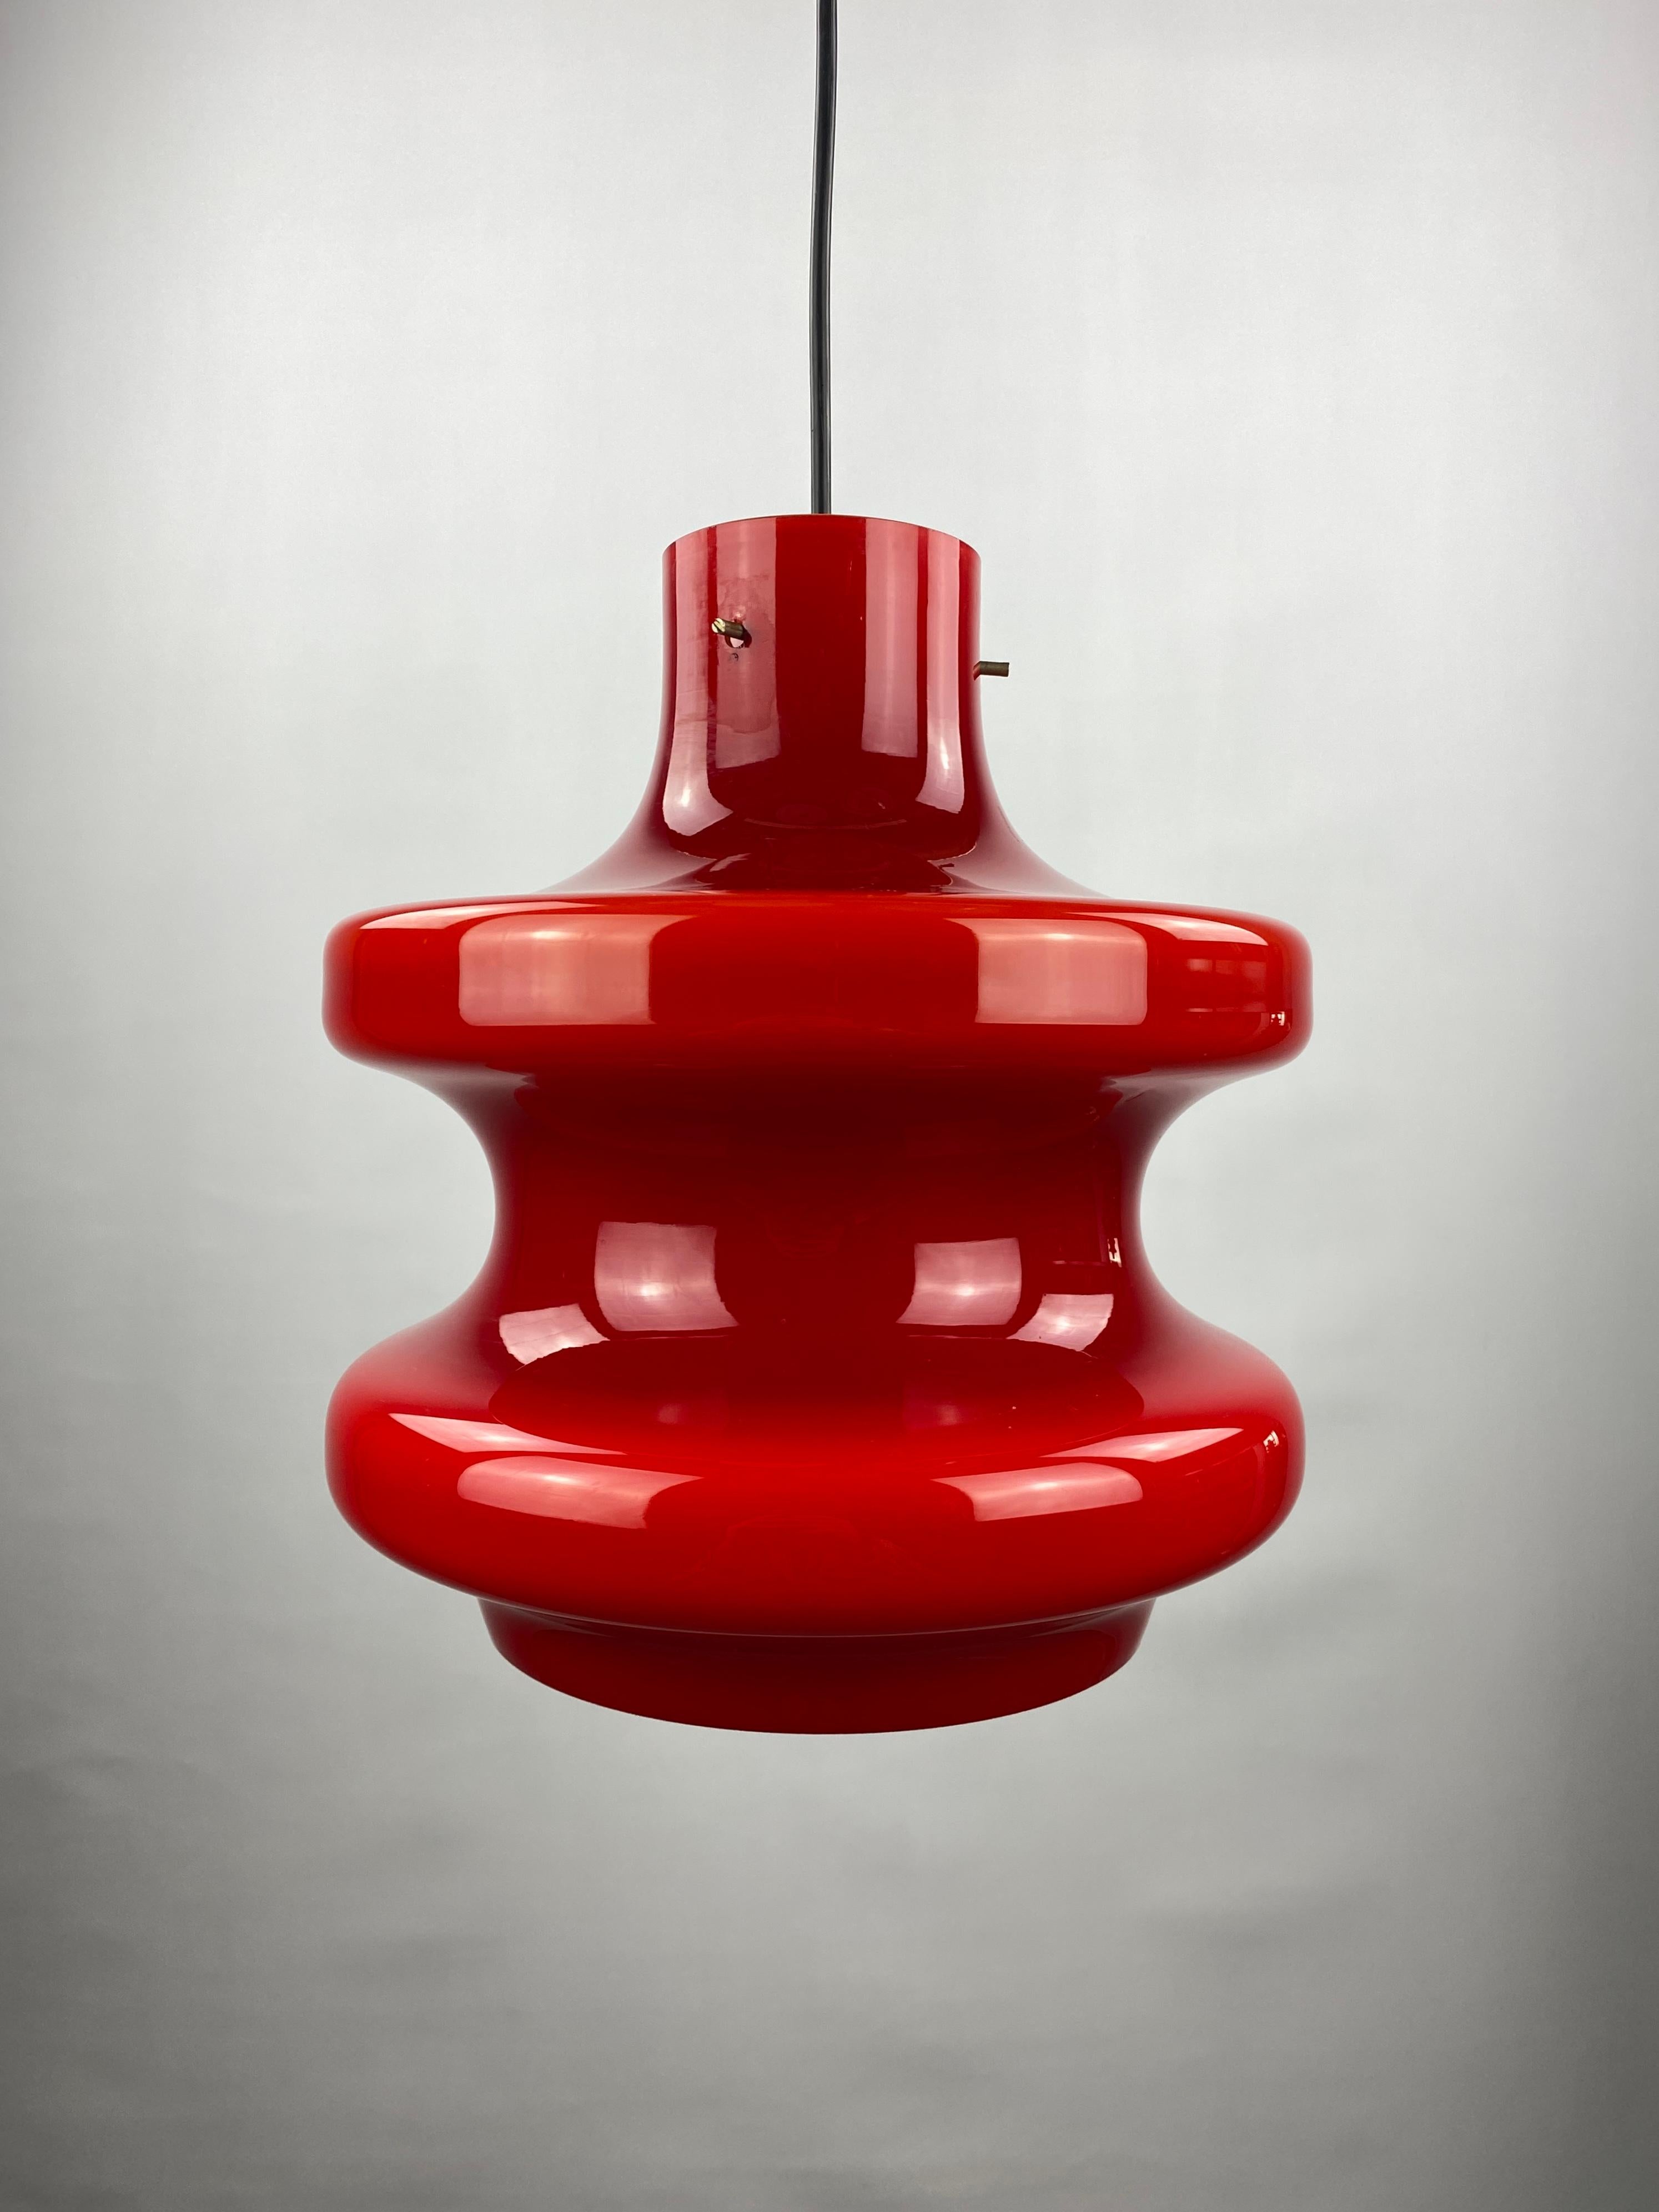 Gorgeous large dark red pendant light by Peill and Putzler, produced around 1960. Lovely cherry red color. This light is bigger than the usual models and is pretty heavy. Stays in place with the three metal pins on top.

These are Peill & Putzler's